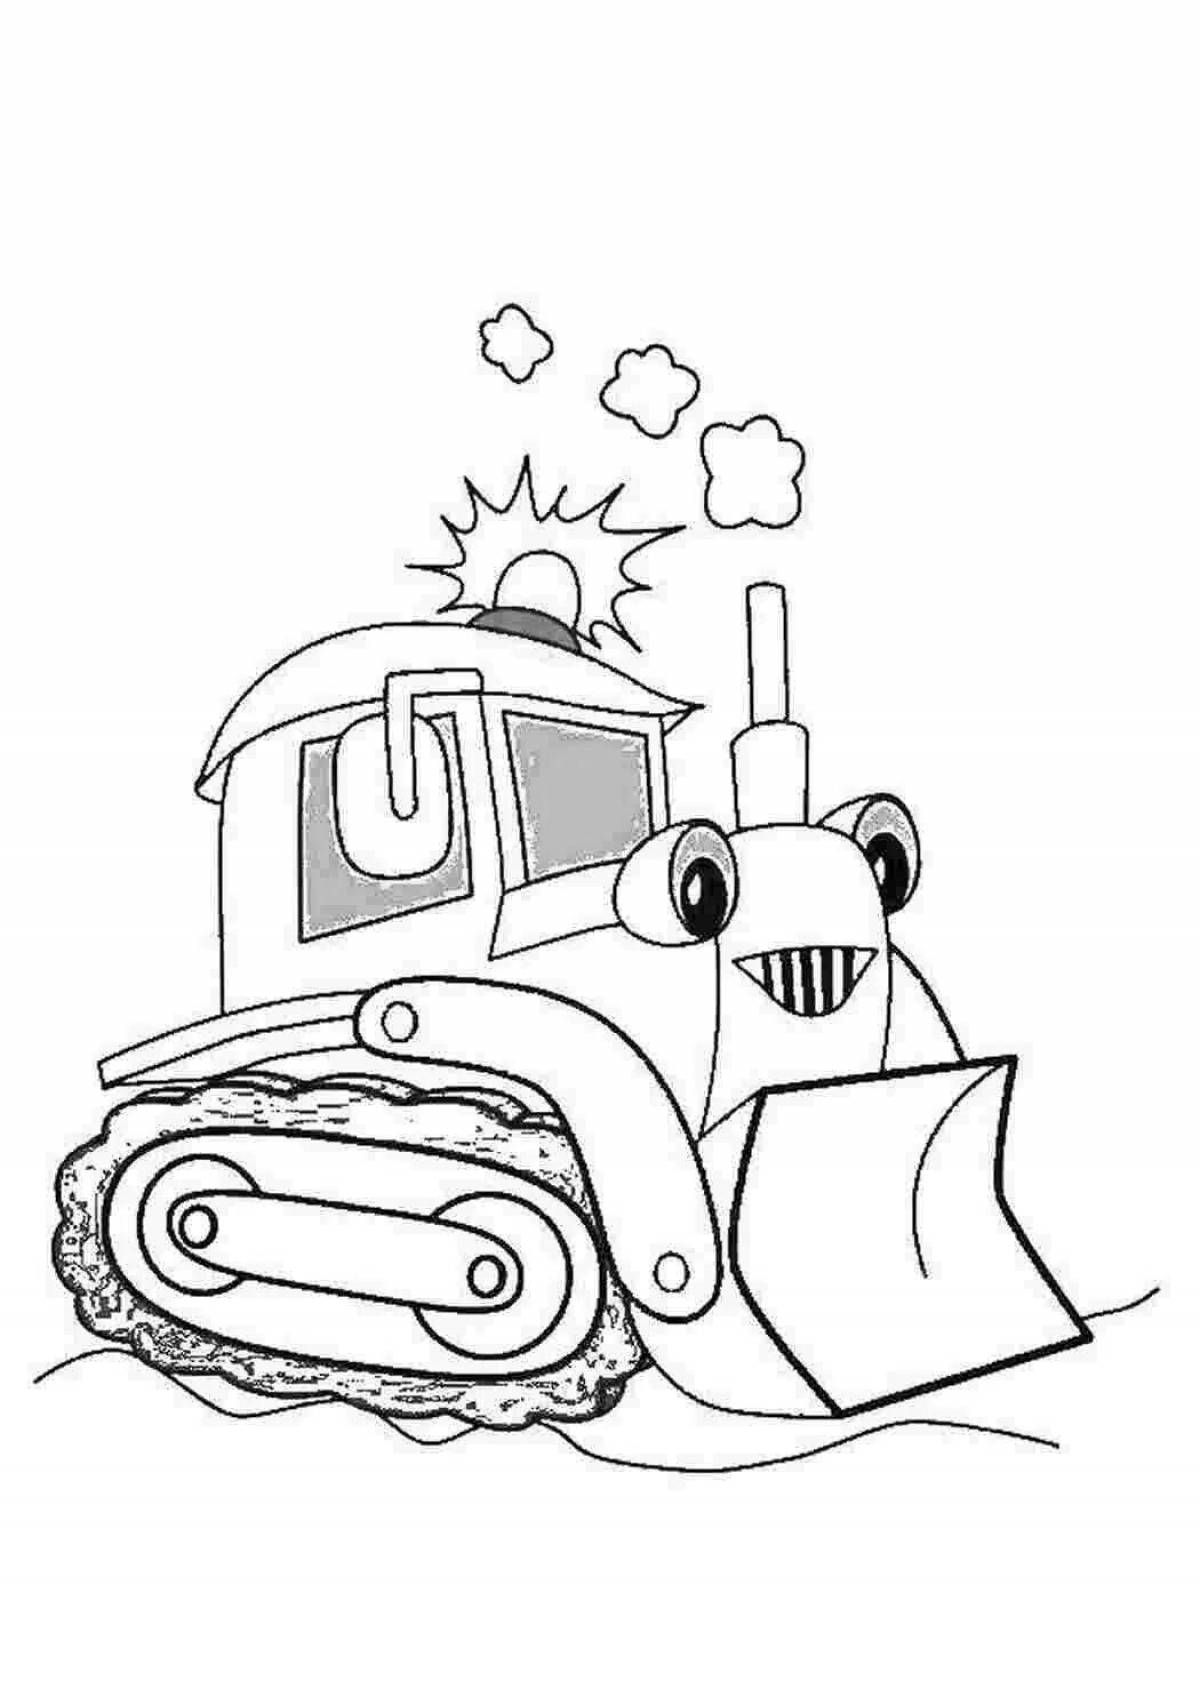 Majestic snowplow coloring page